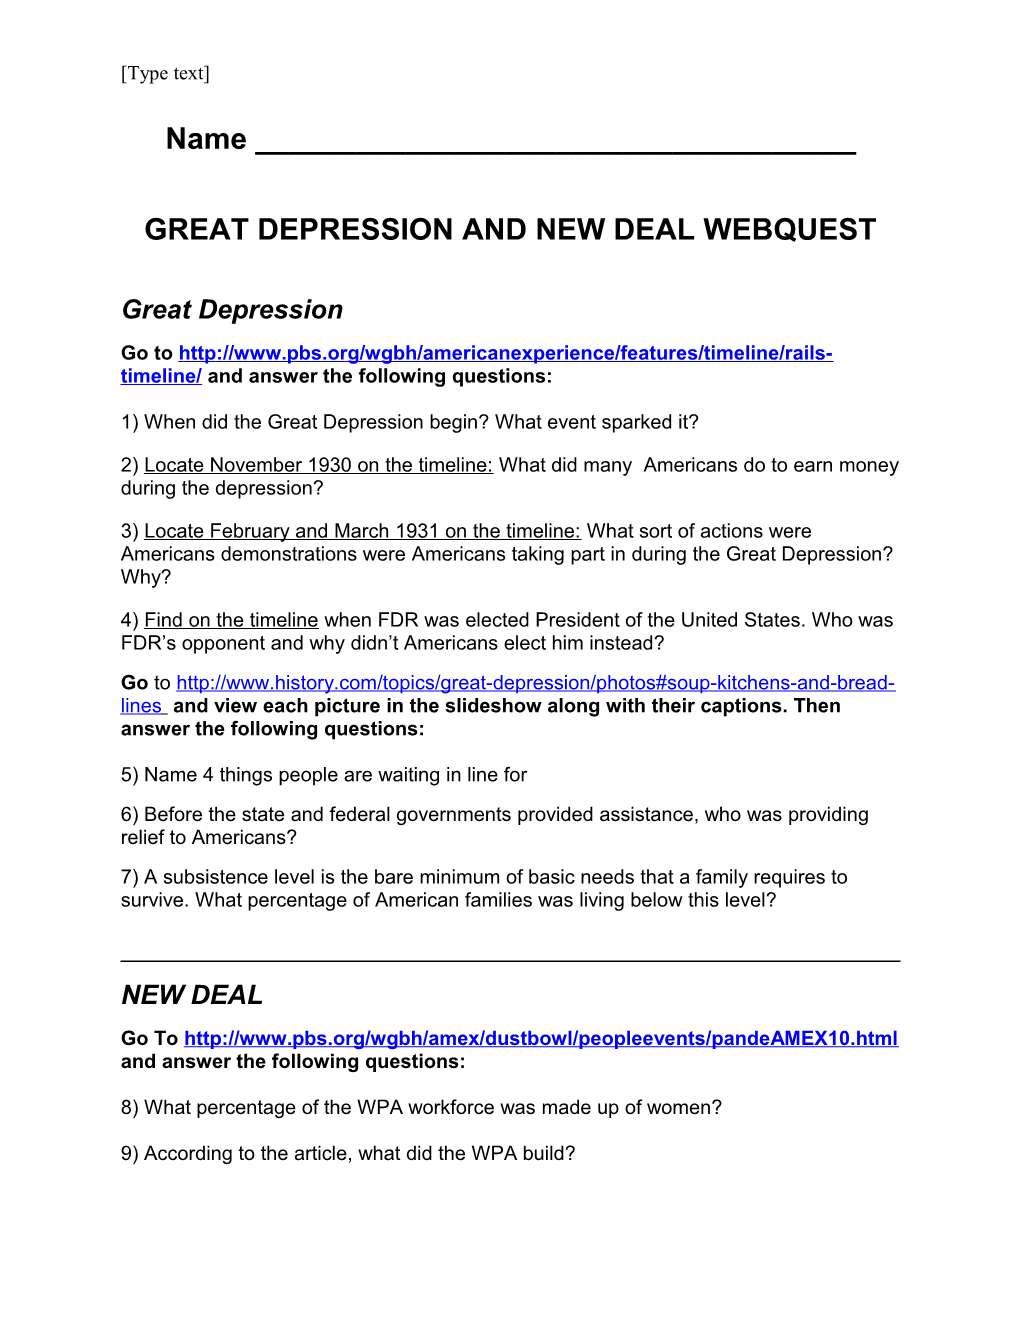 Great Depression and New Deal Webquest